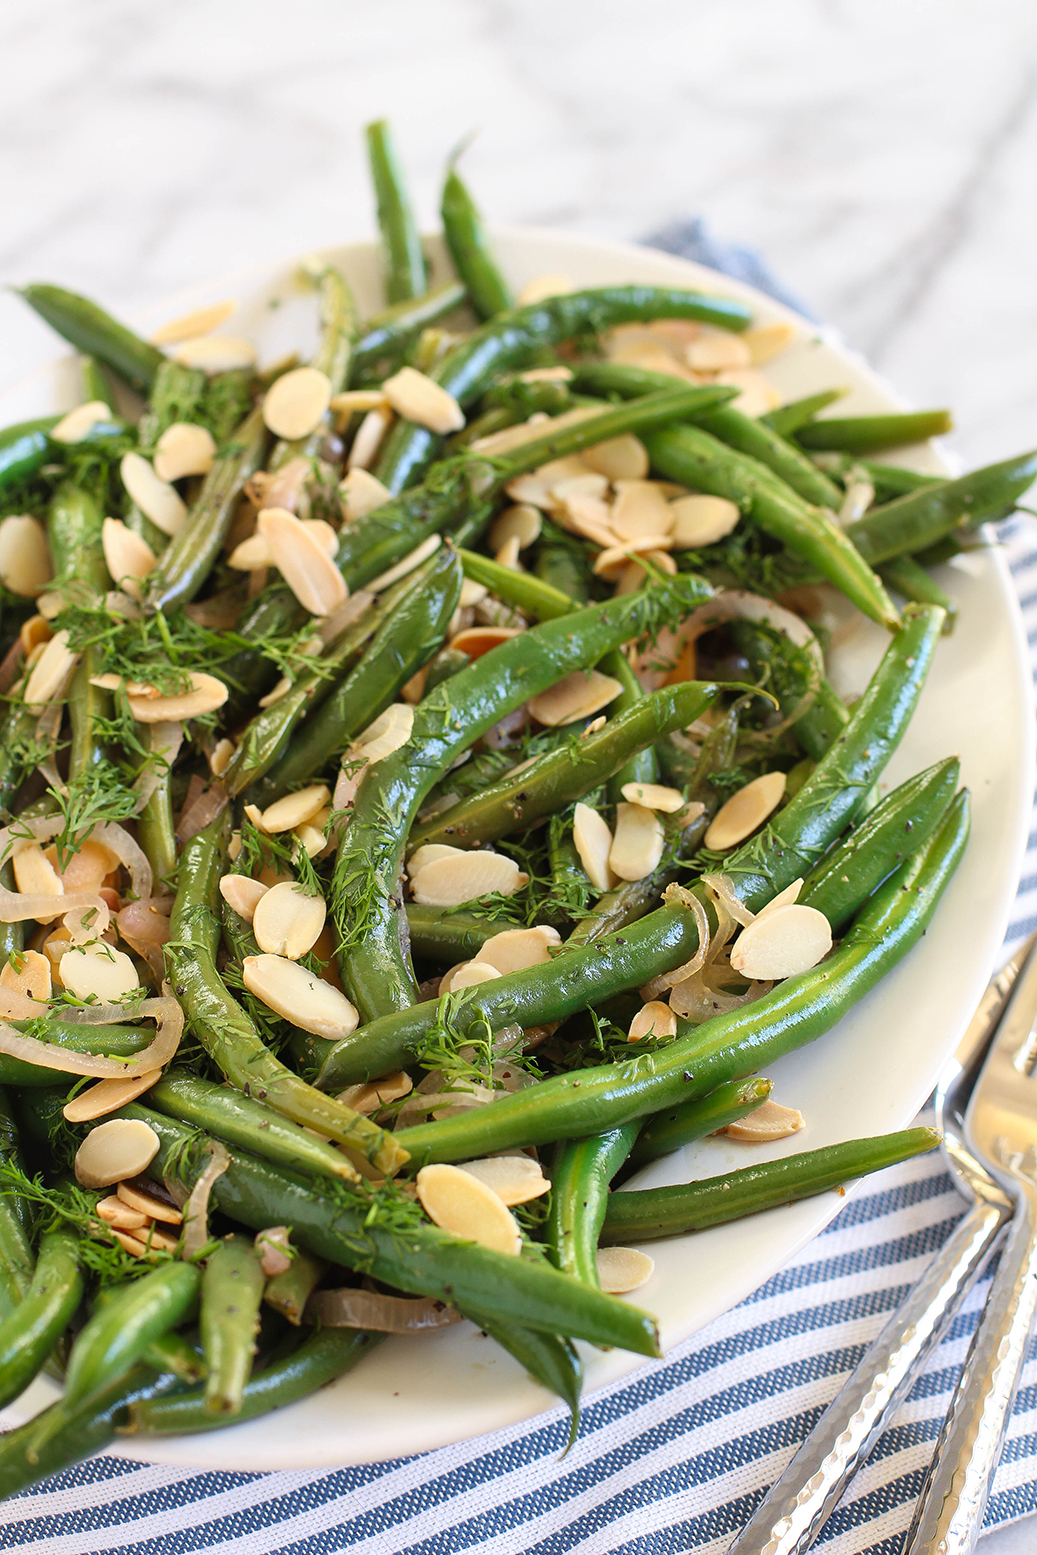 Apple Cider Green Beans with Shallots & Dill | The Mostly Vegan